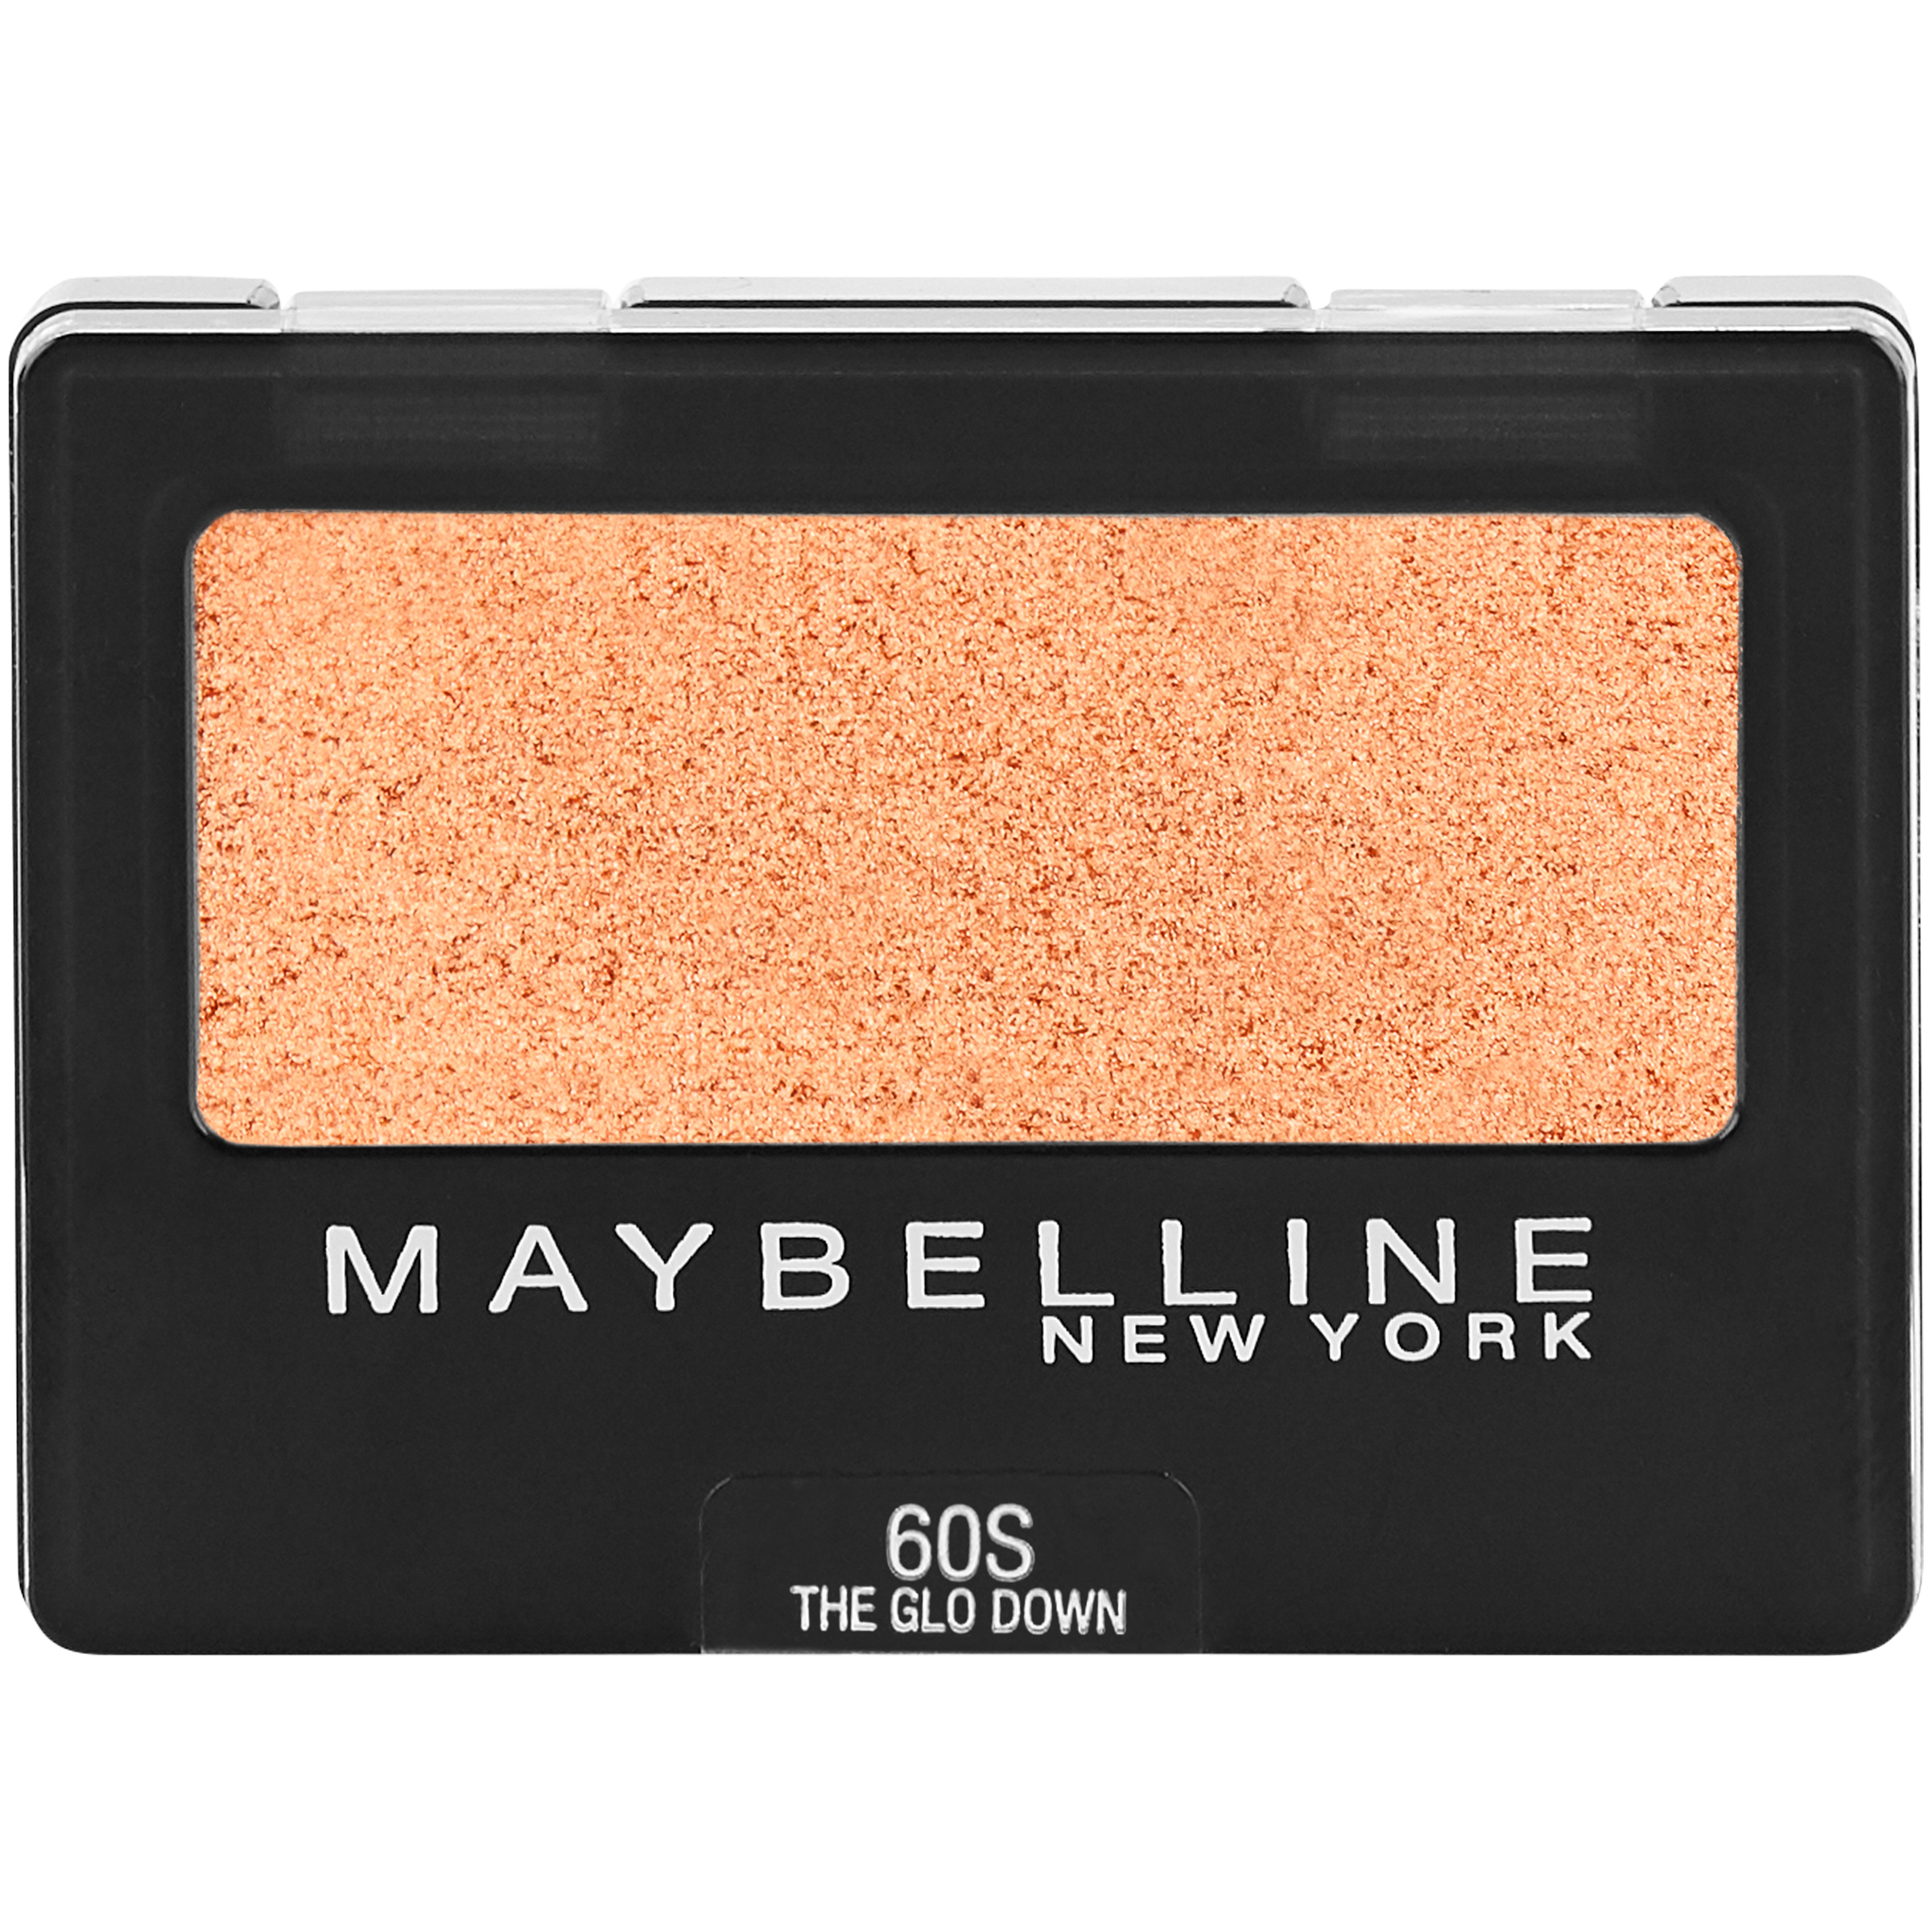 Maybelline New York  Expert Wear Eyeshadow 60S The Glo Down 0.08 Oz. Compact